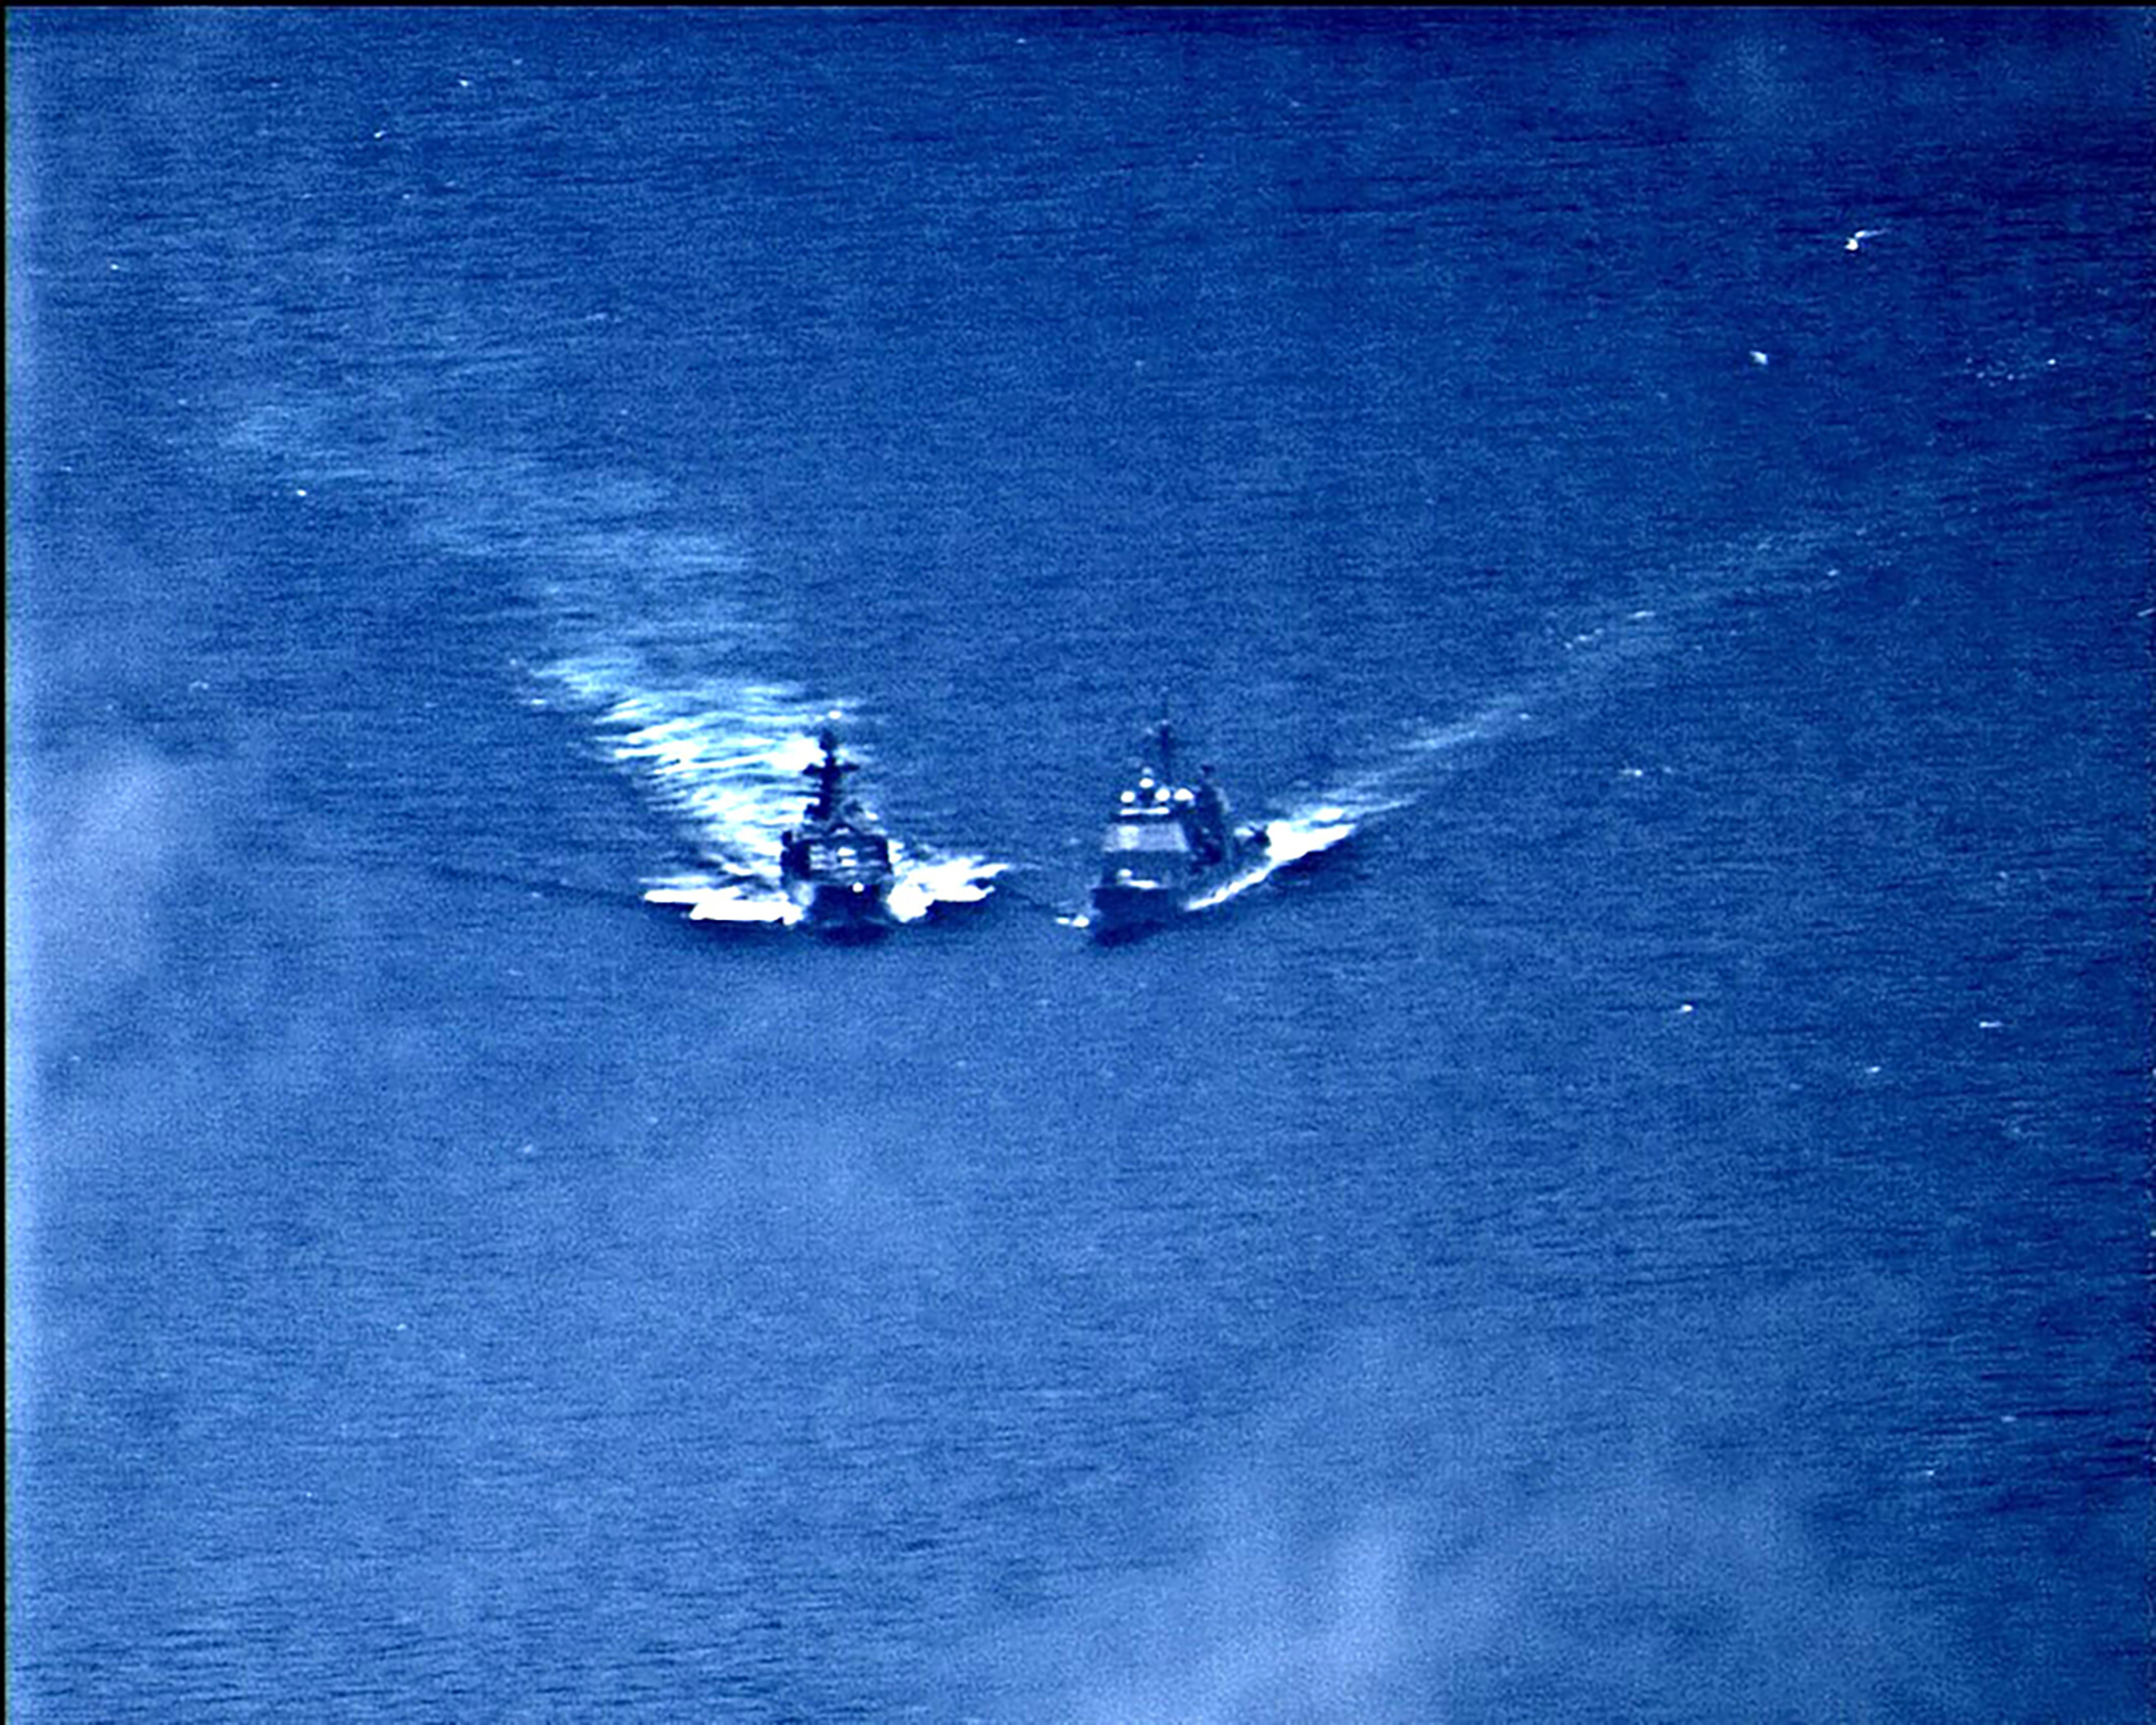 PHOTO: A surveillance photo shows a Russian naval destroyer making what the U.S. Navy describes as an unsafe maneuver against the Ticonderoga-class guided-missile cruiser USS Chancellorsville in the Philippine Sea, June 7, 2019.